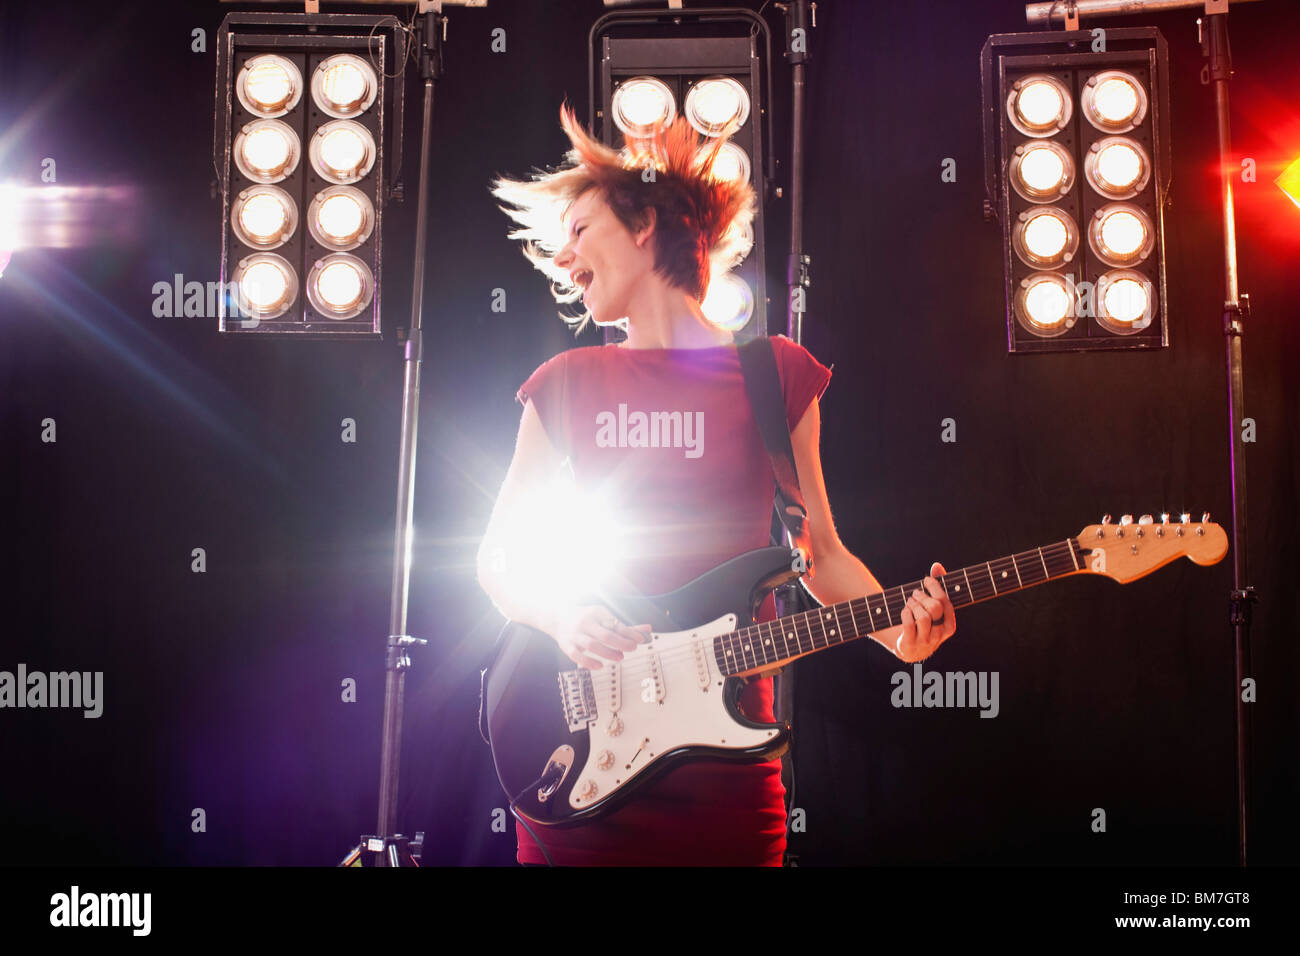 A woman playing electric guitar performing on stage Stock Photo